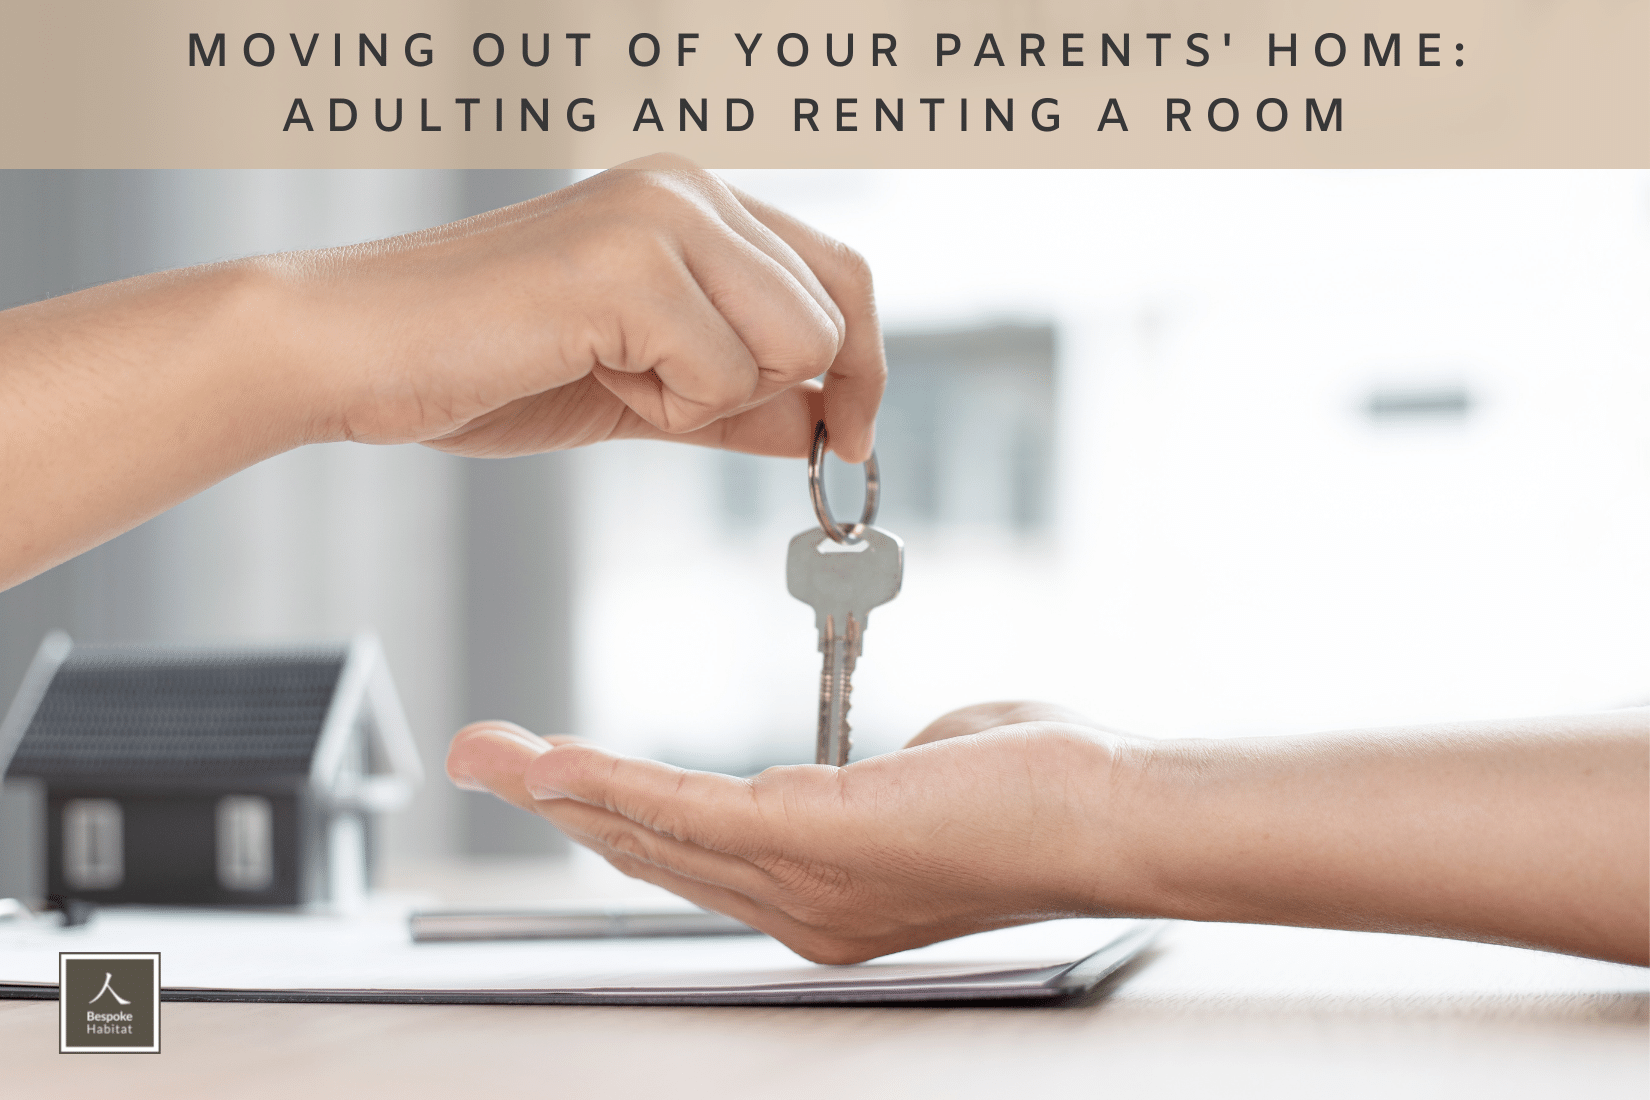 Moving Out Of Your Parents' Home: Adulting and Renting Your Own Room